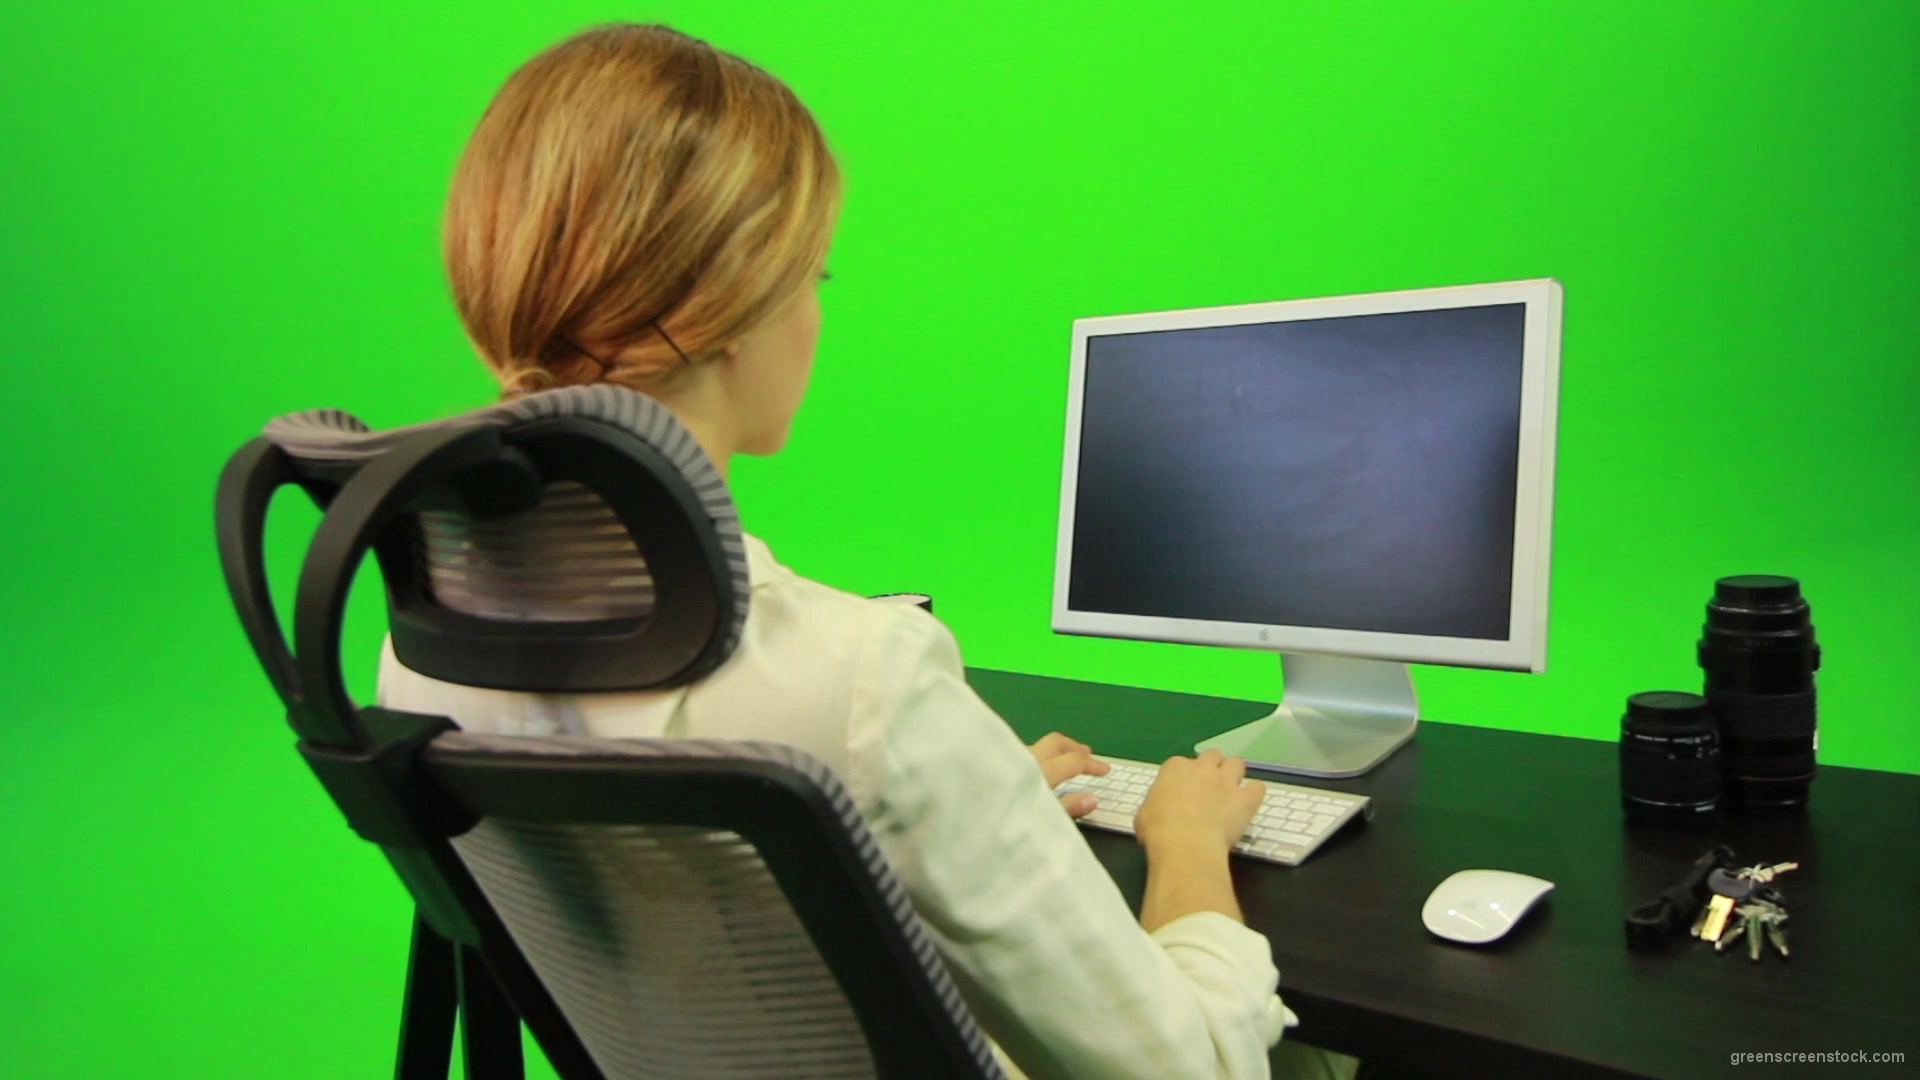 Woman-Working-on-the-Computer-5-Green-Screen-Footage_004 Green Screen Stock